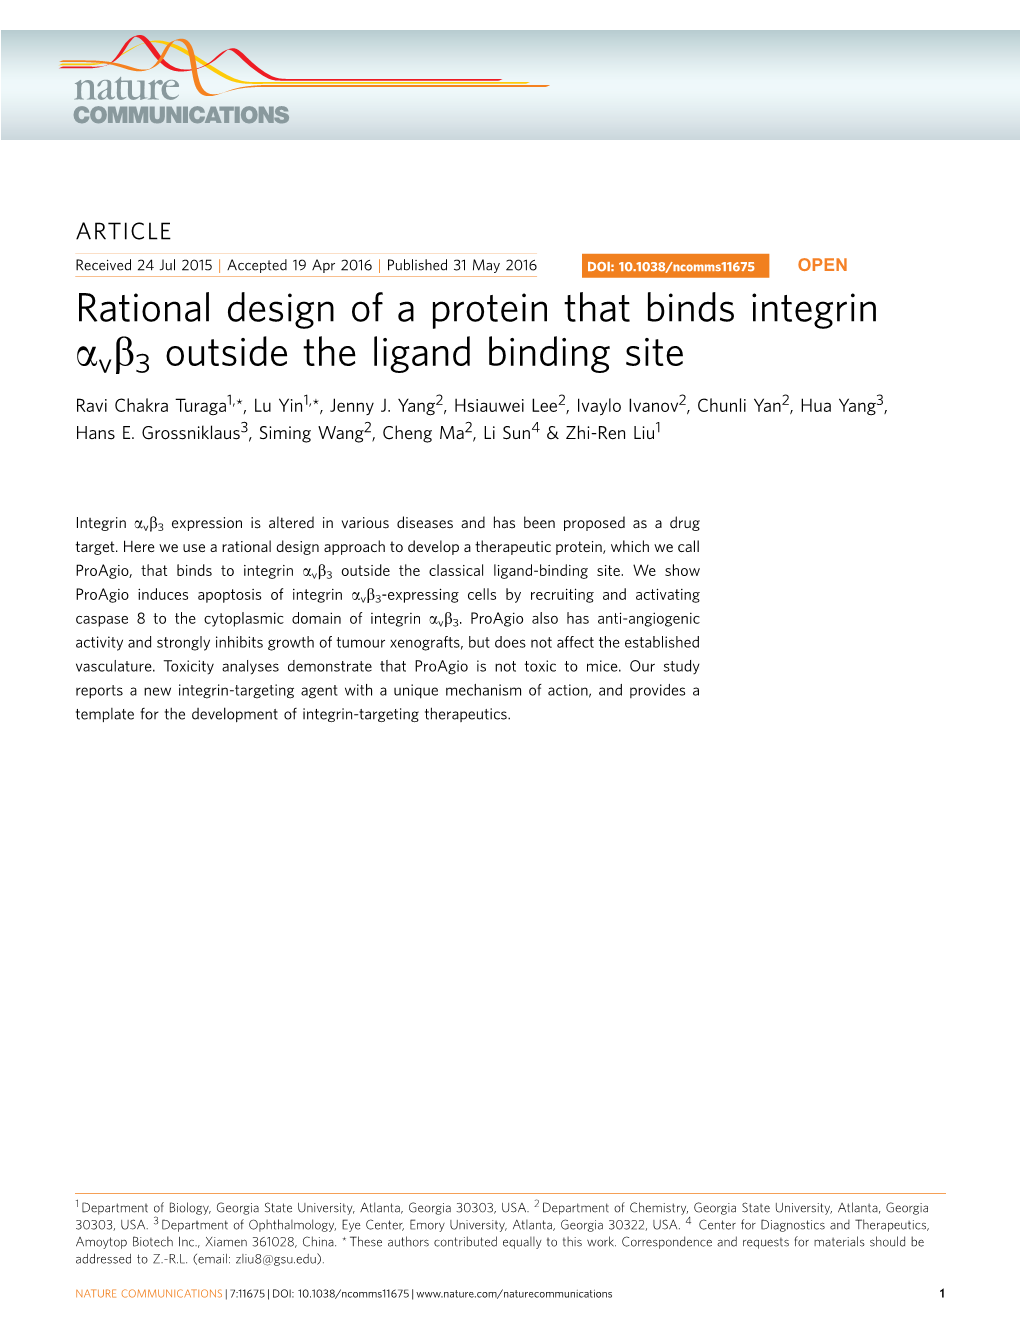 Rational Design of a Protein That Binds Integrin &Alpha